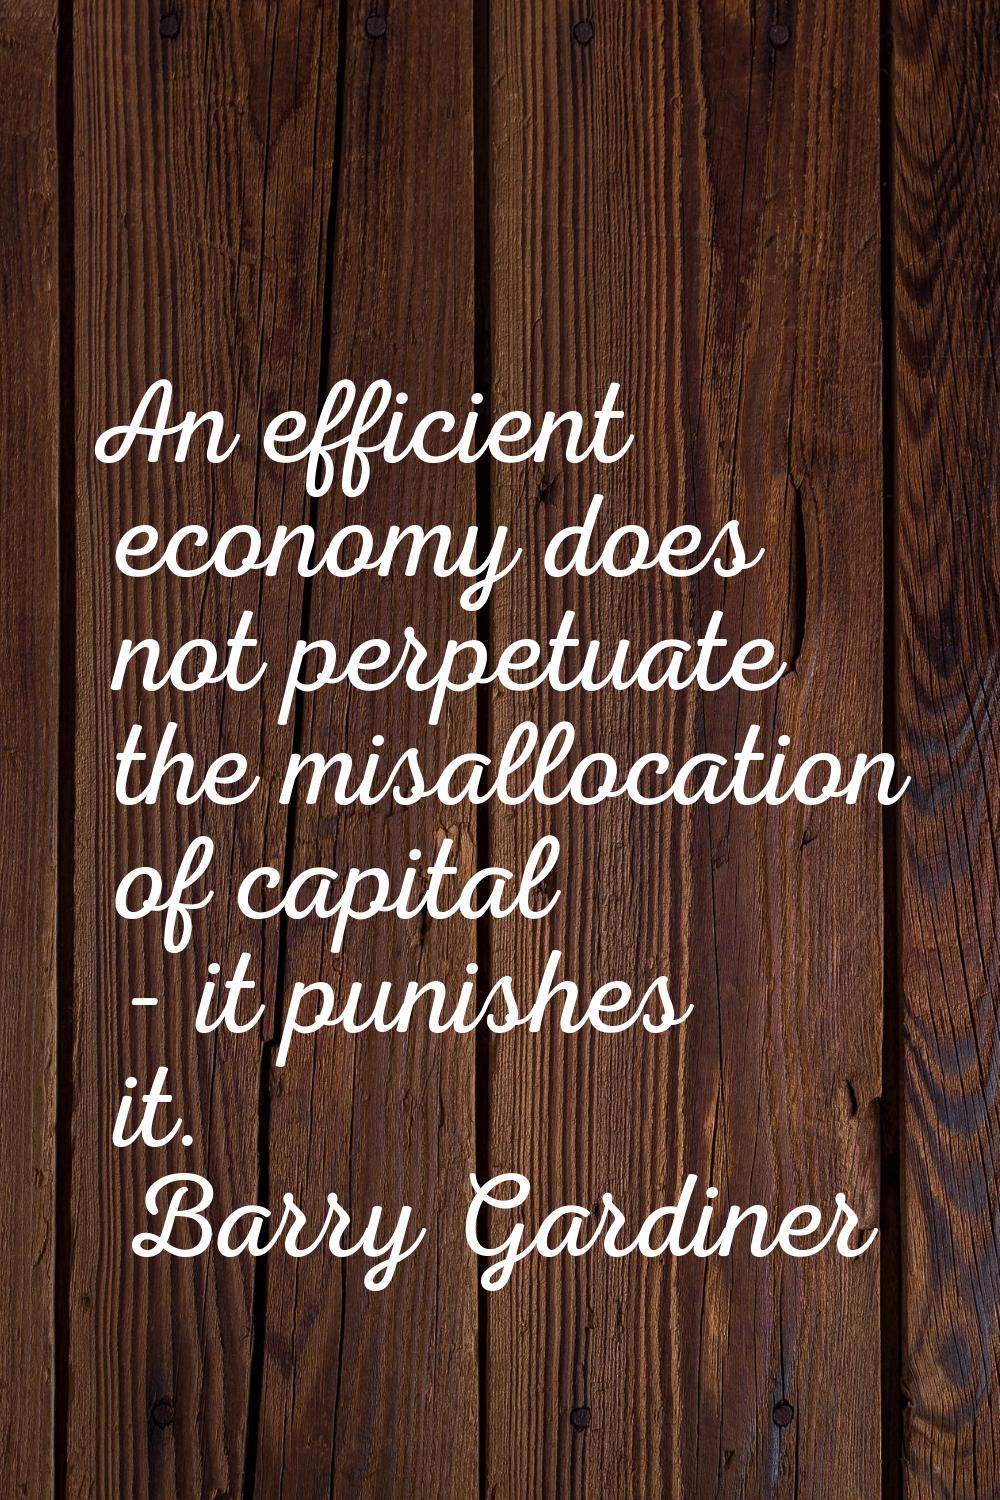 An efficient economy does not perpetuate the misallocation of capital - it punishes it.